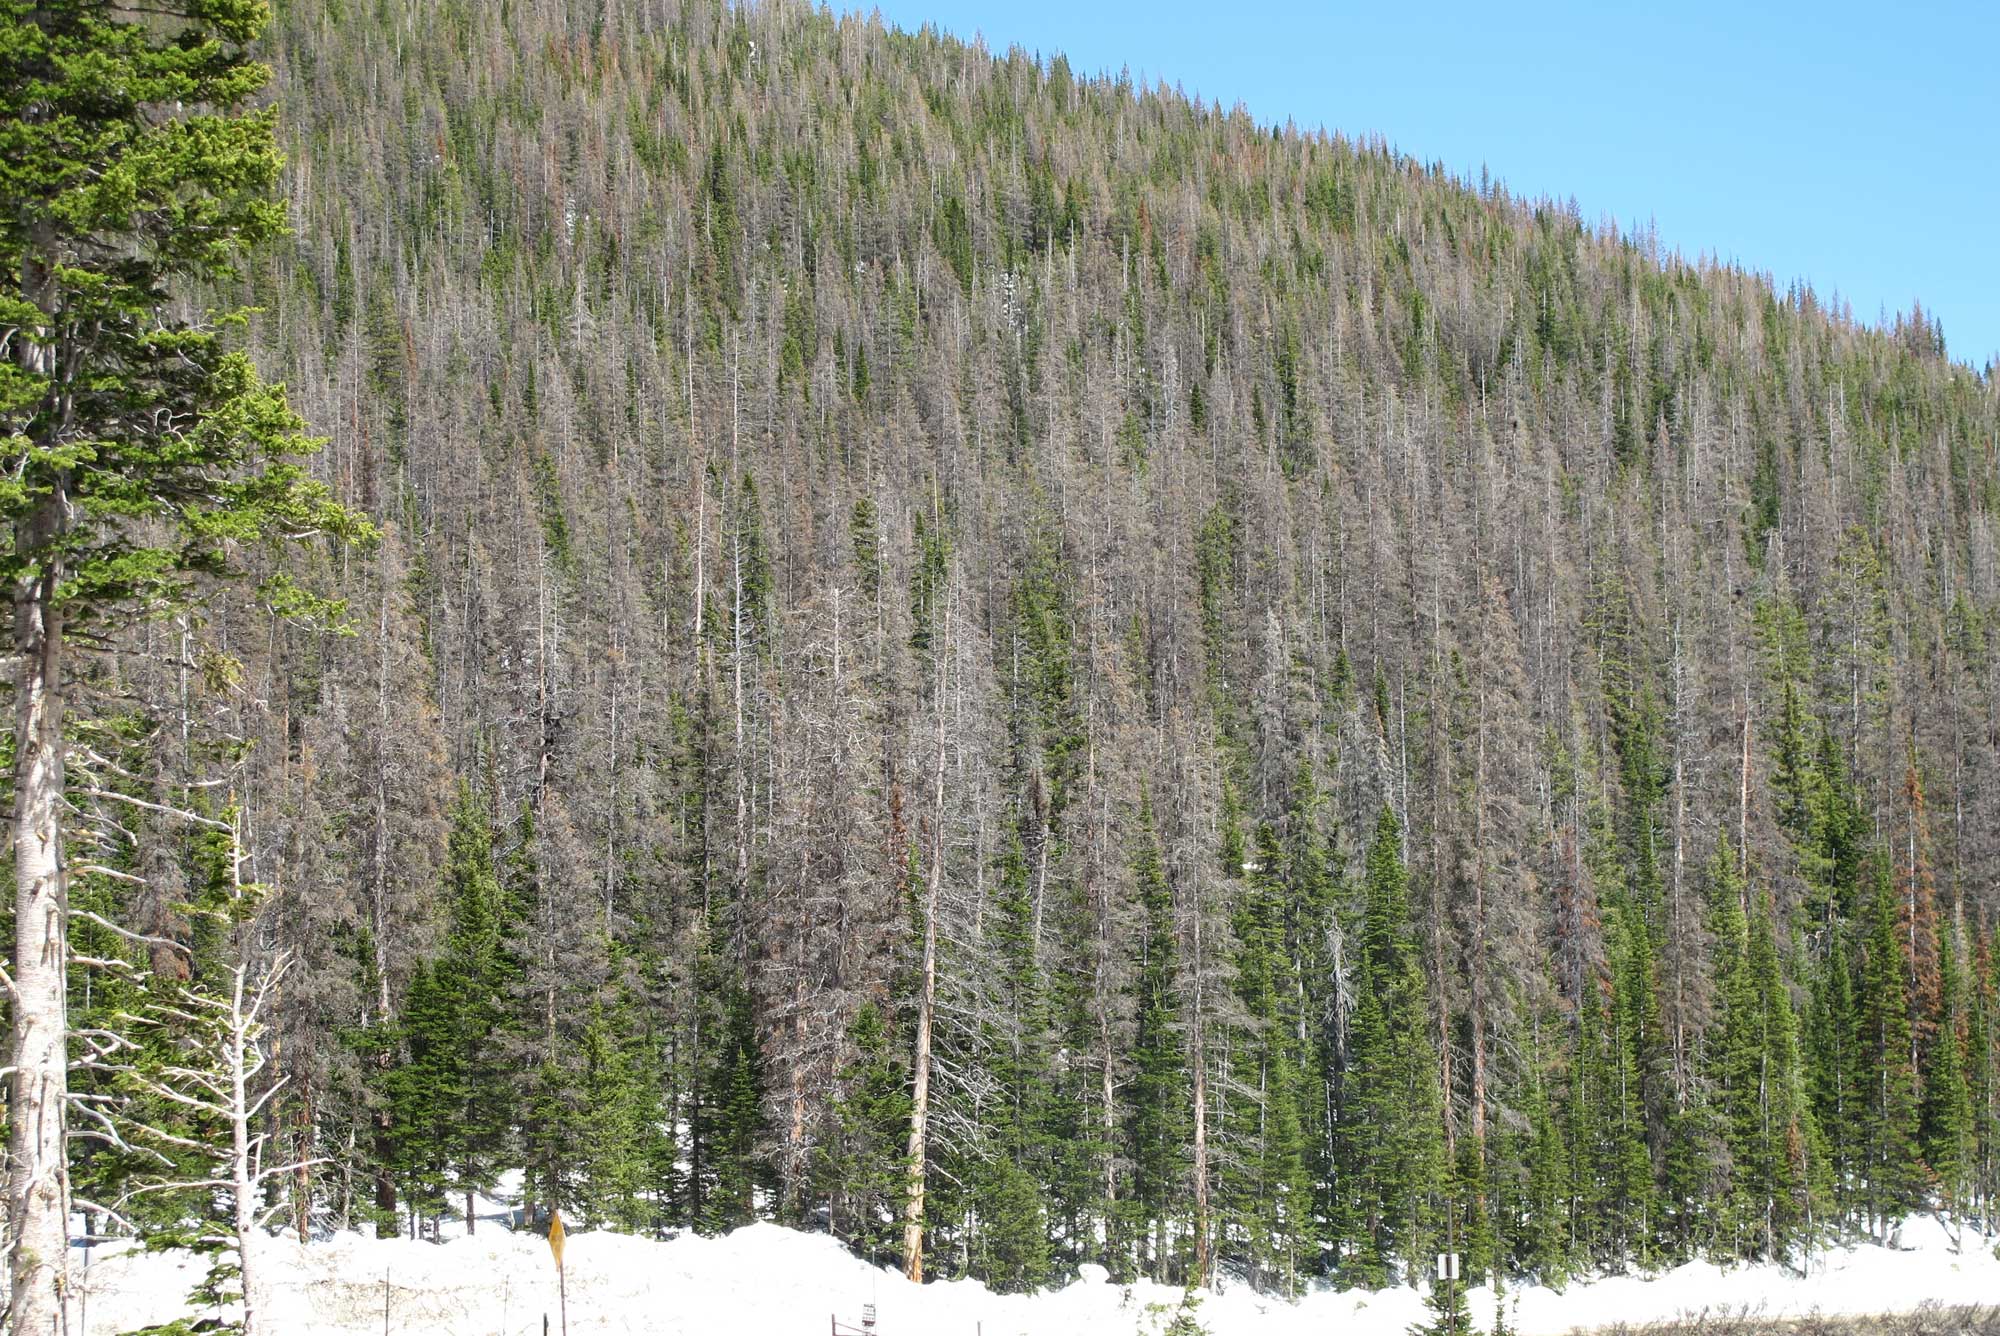 Photo of a hillside covered with conifers. Live green tress are mixed with many dead trees that have orange needles or no needles.